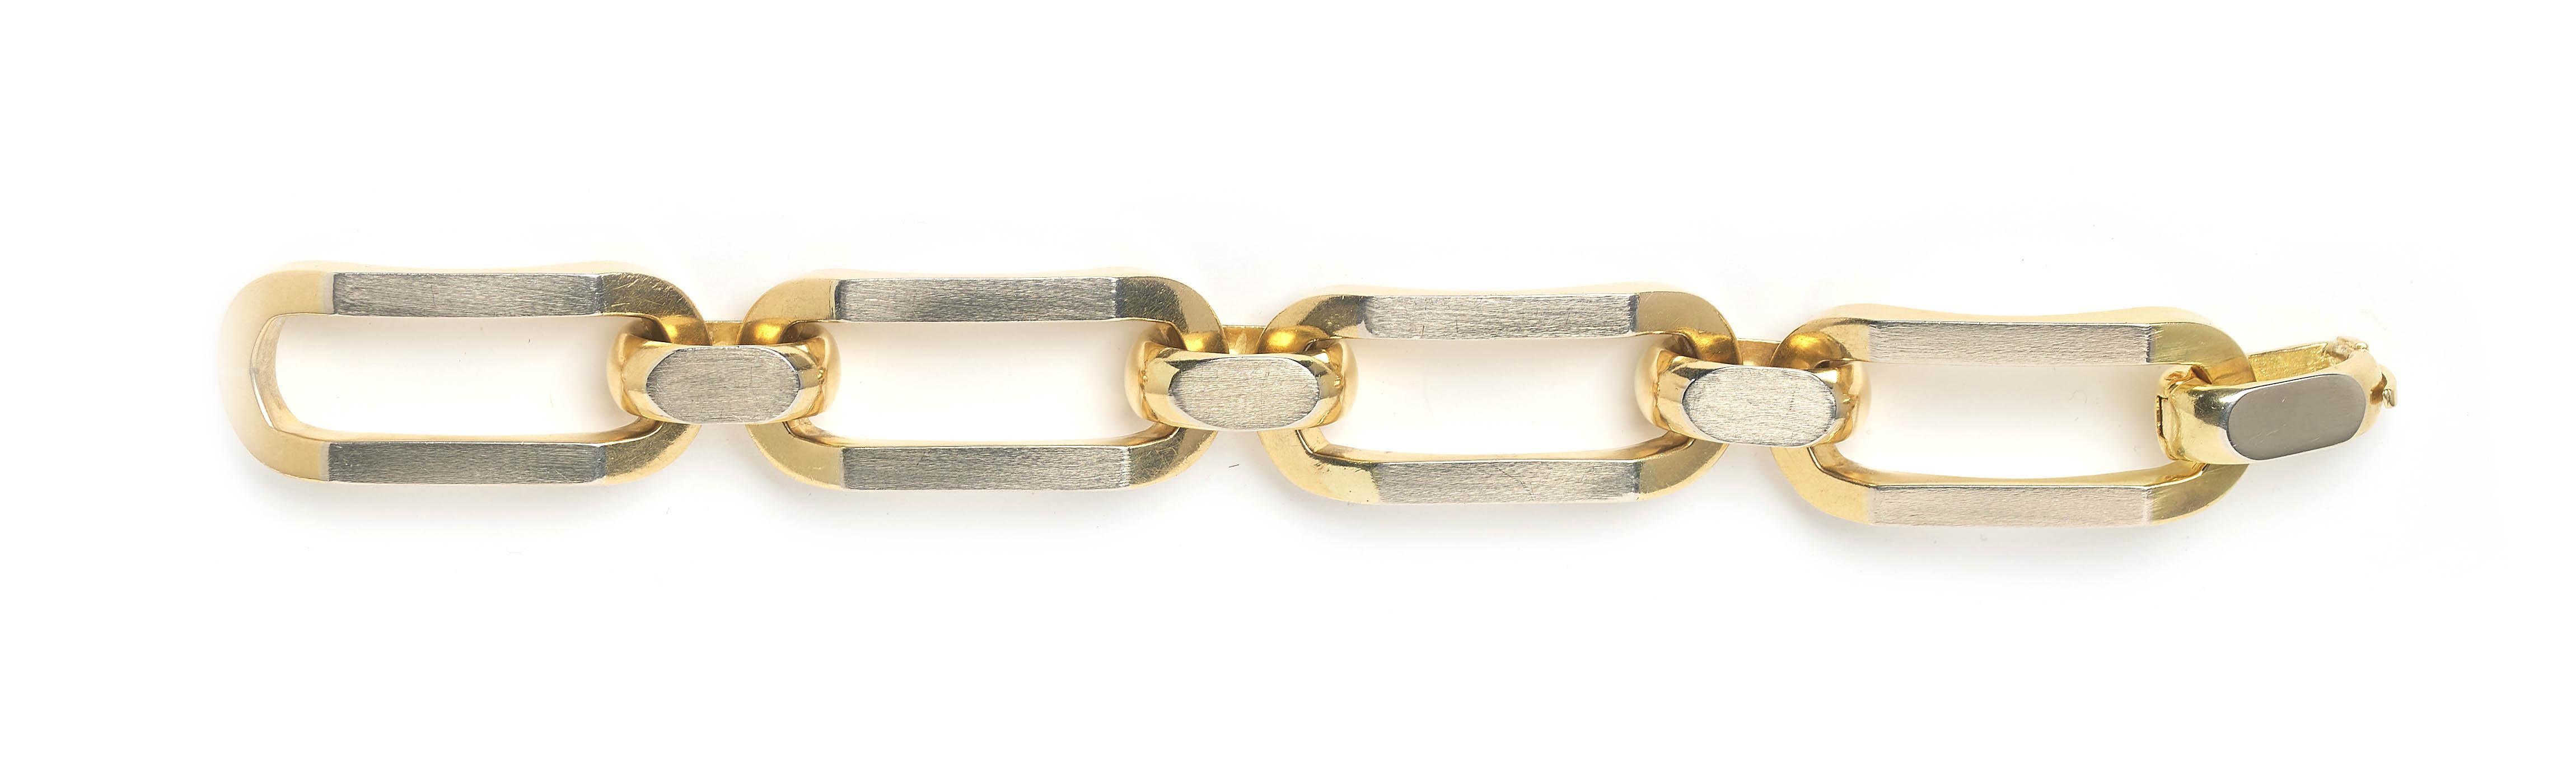 An Italian 18ct gold and platinum chain link bracelet, by UnoAErre, featuring chunky long and short links, with a satin finish, platinum overlay on the gold links. The long links are curved for a comfortable fit, with an invisible clasp, stamped